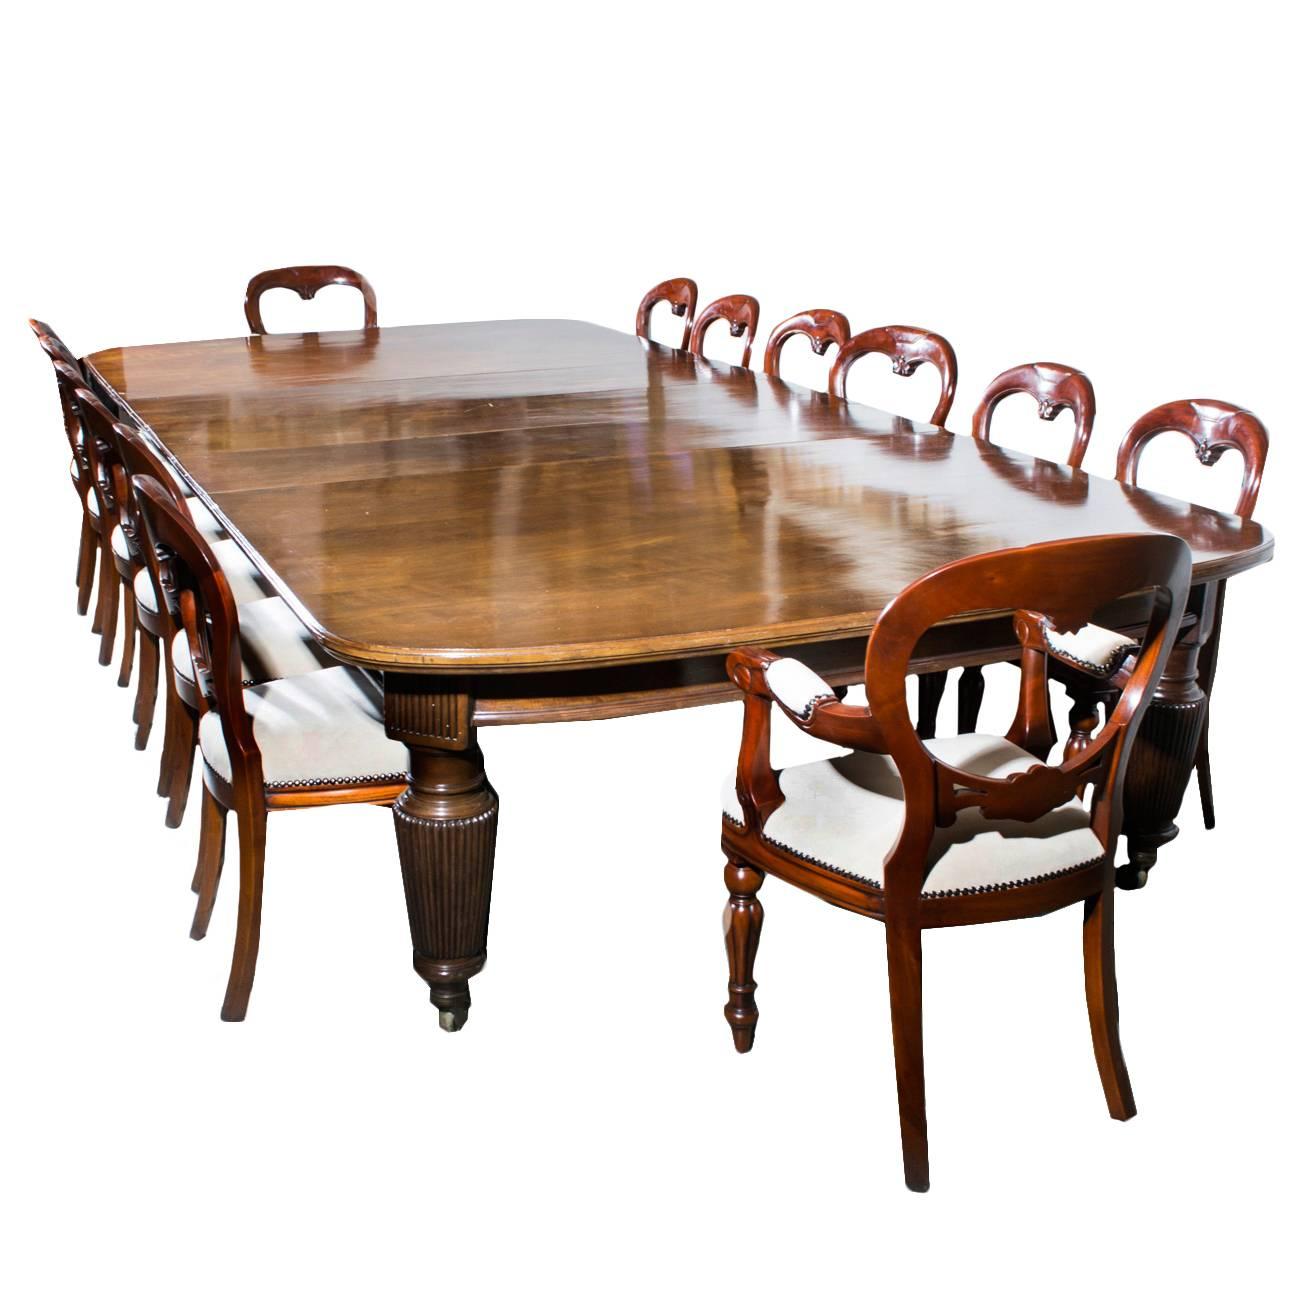 Antique Extending Dining Table 14 Chairs, circa 1880